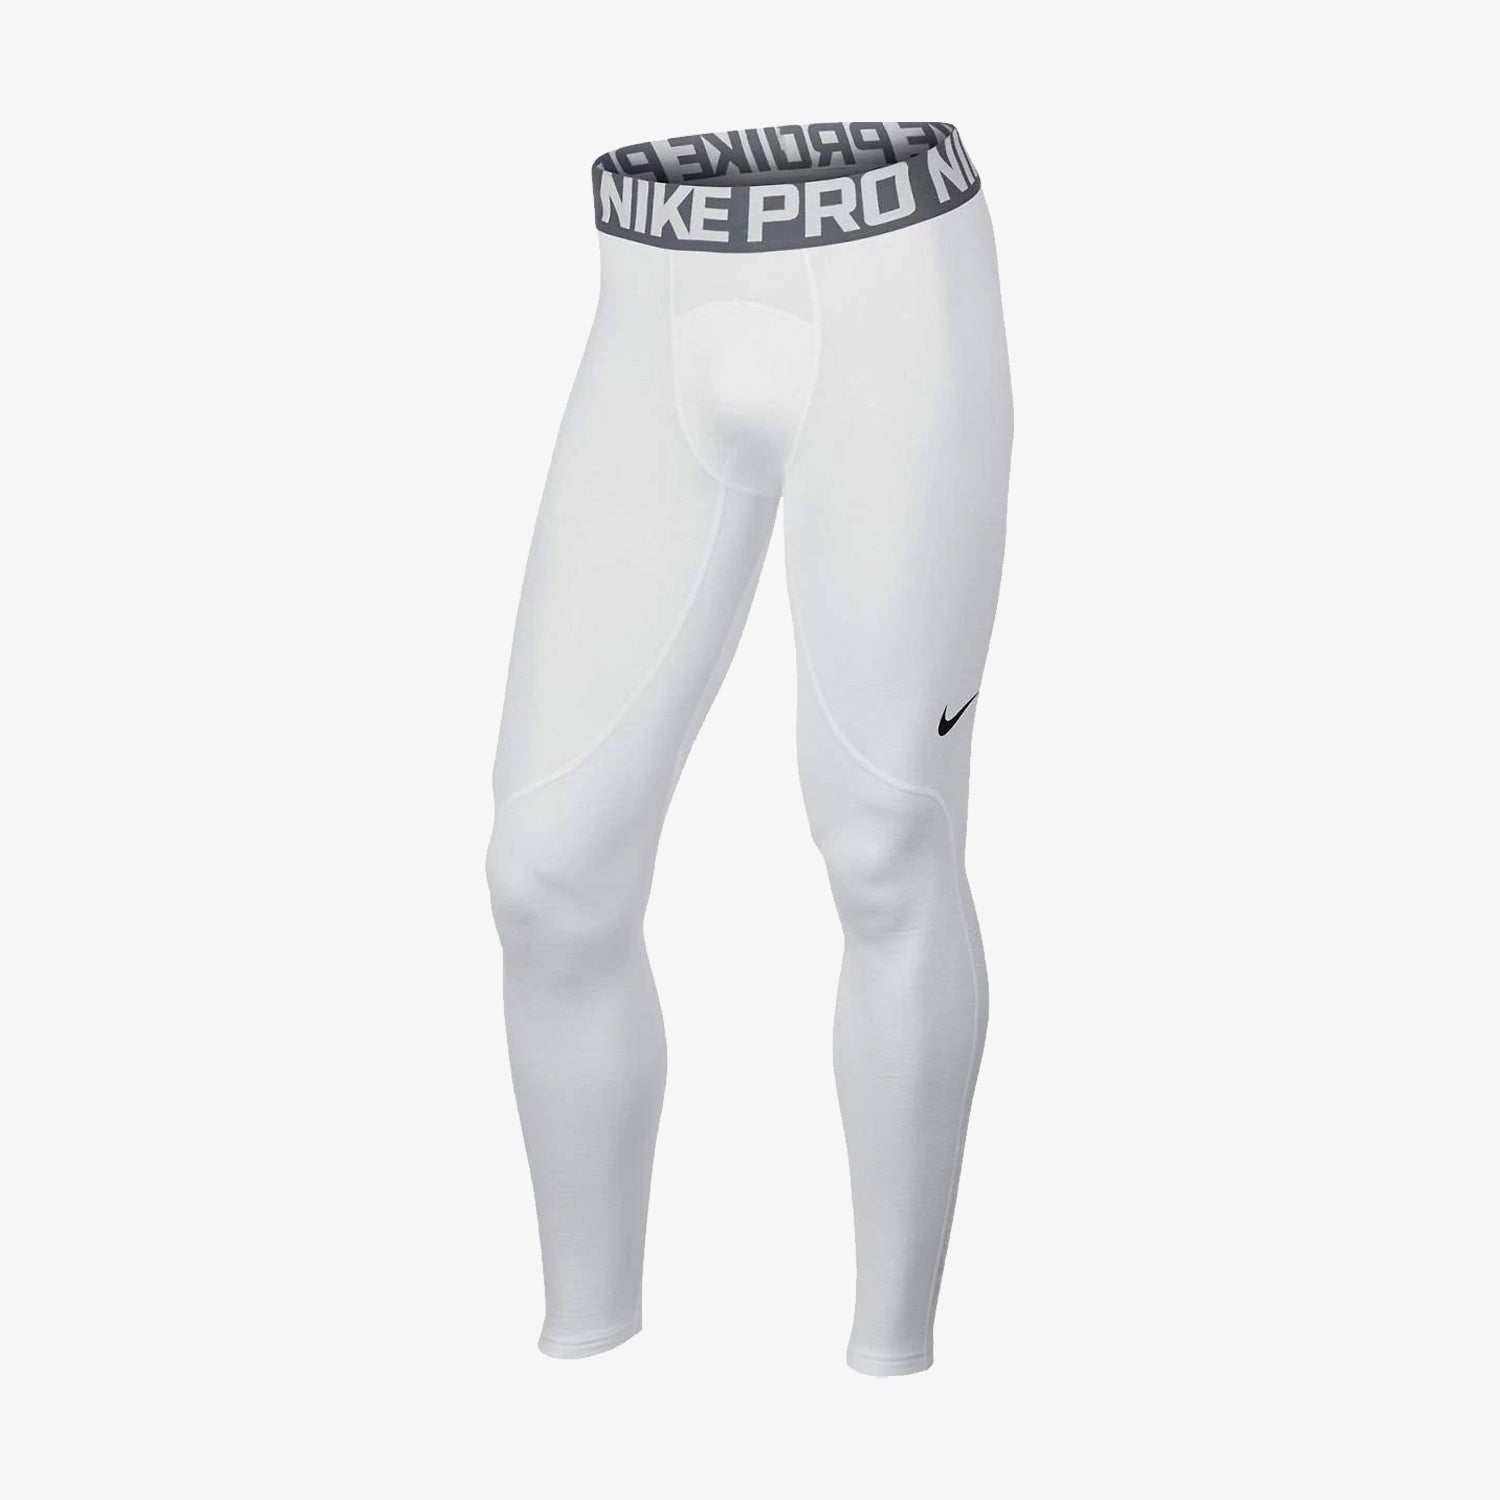 Men's White Trousers & Tights. Nike CH